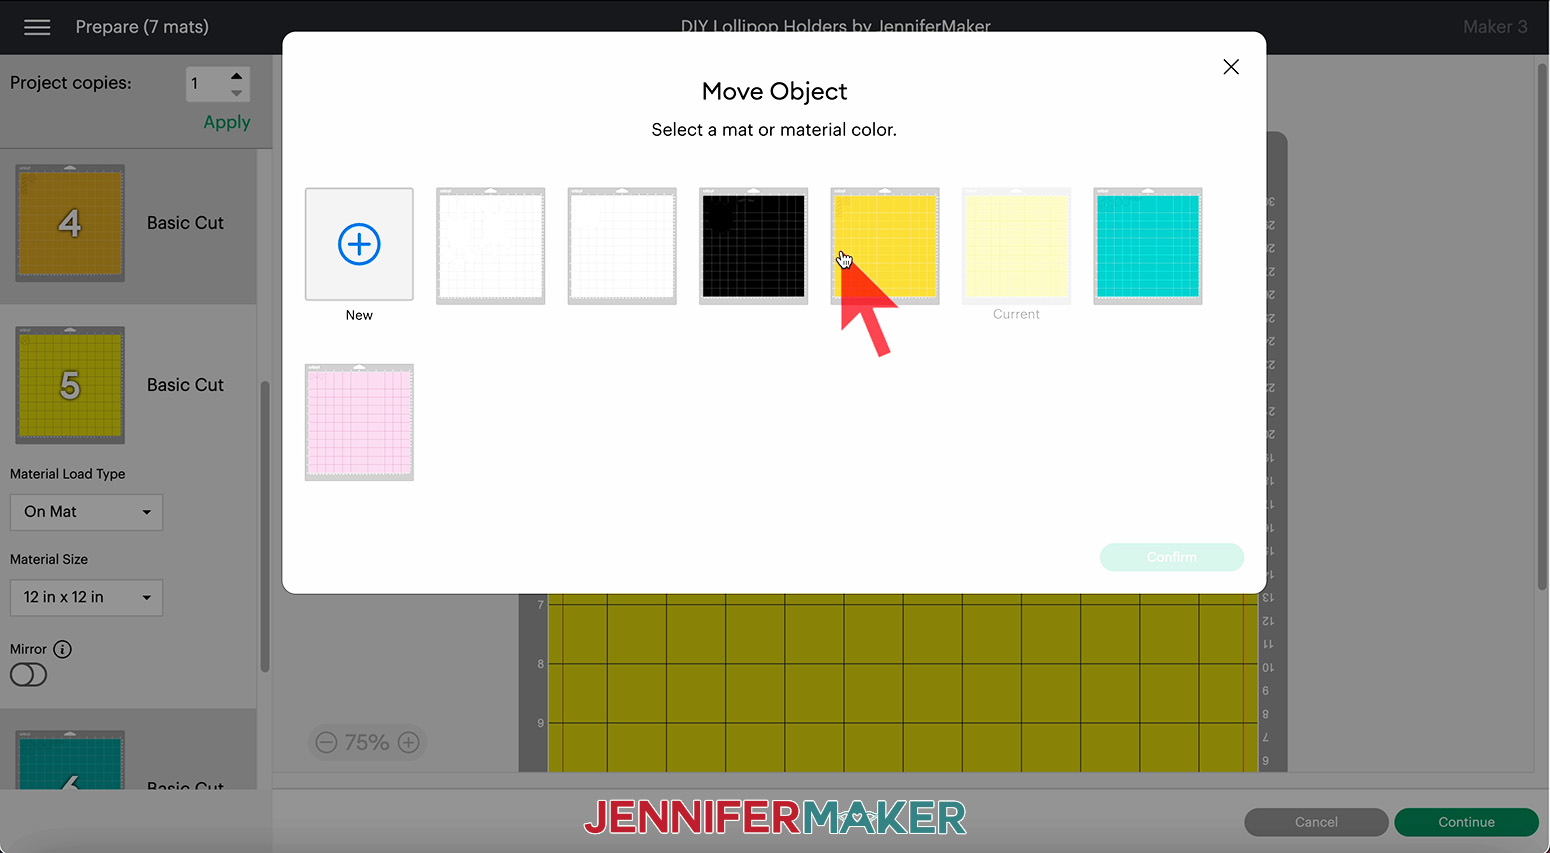 Cricut Design Space view of selecting a new mat for DIY lollipop holder objects.